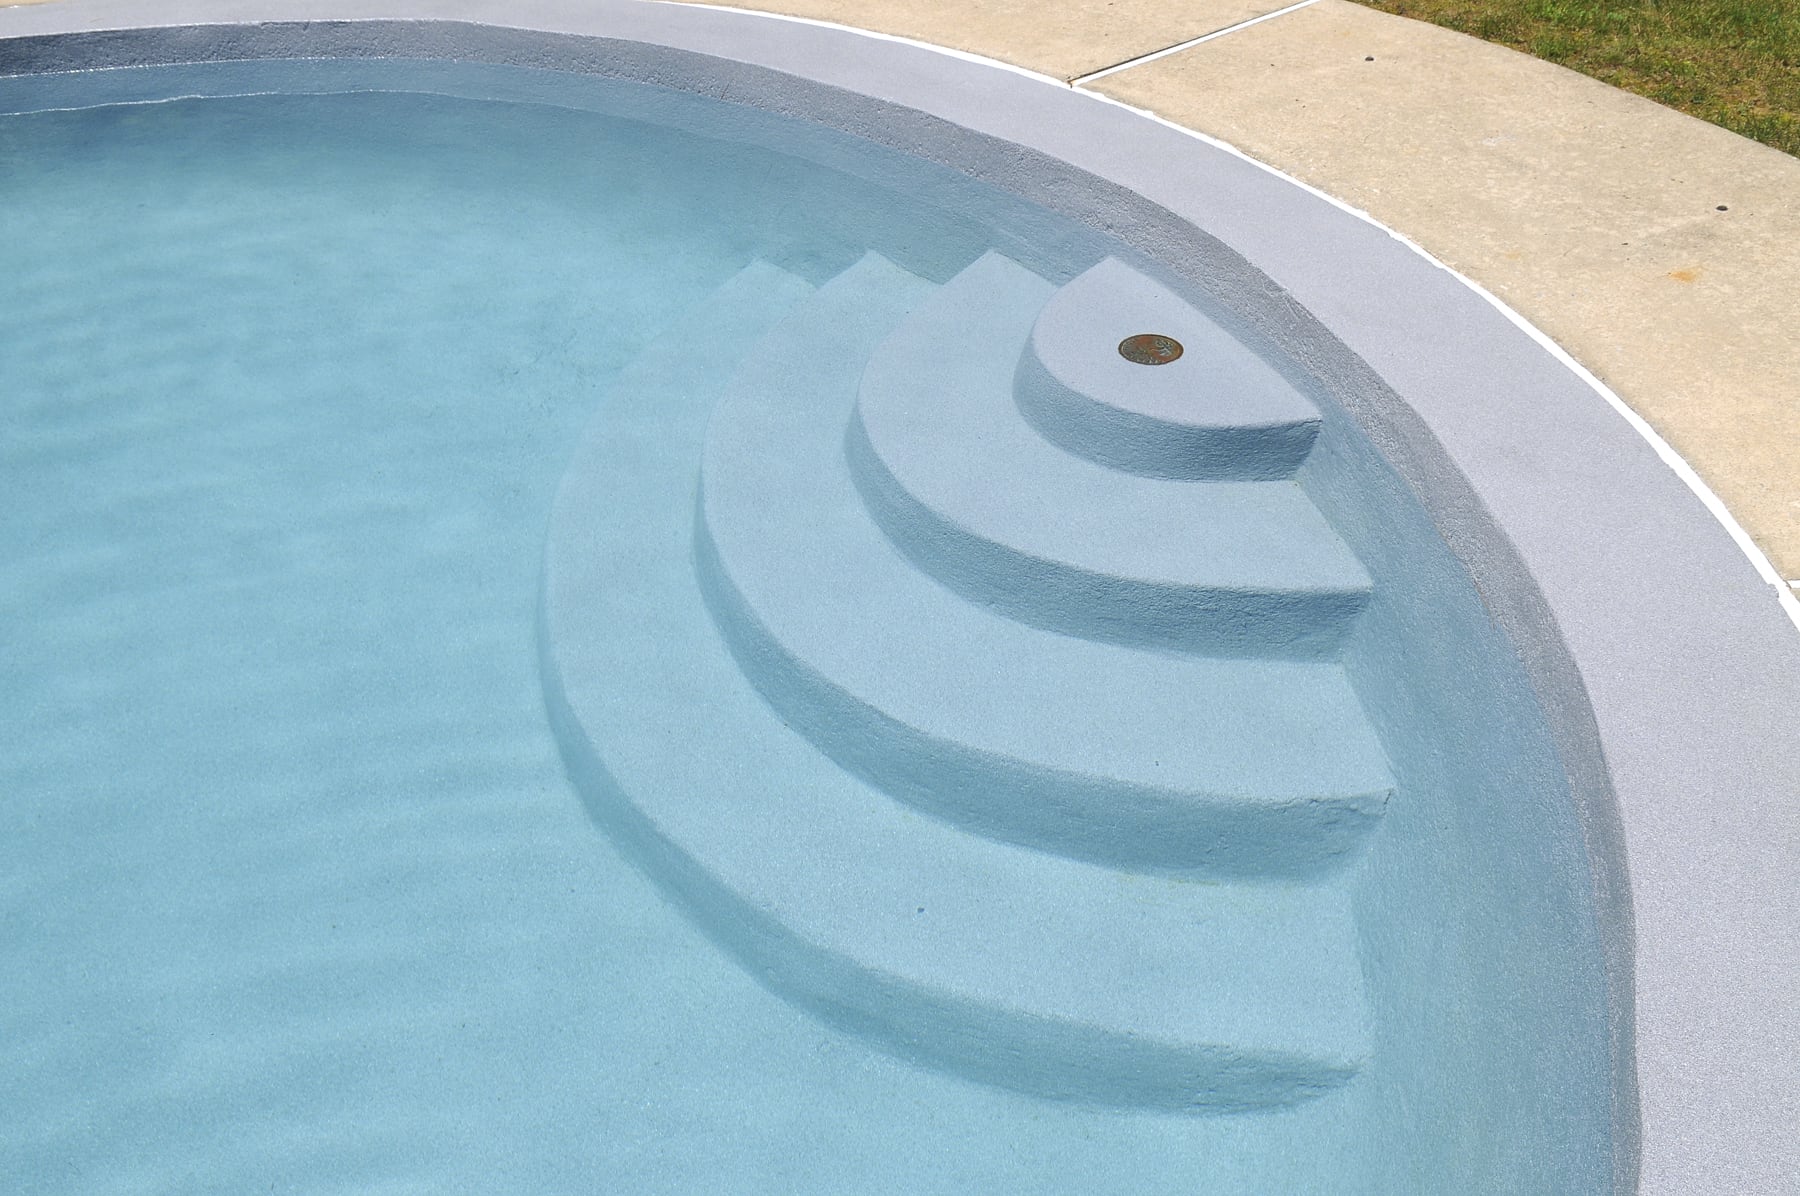 Pool steps featuring a grey reef pool finish.